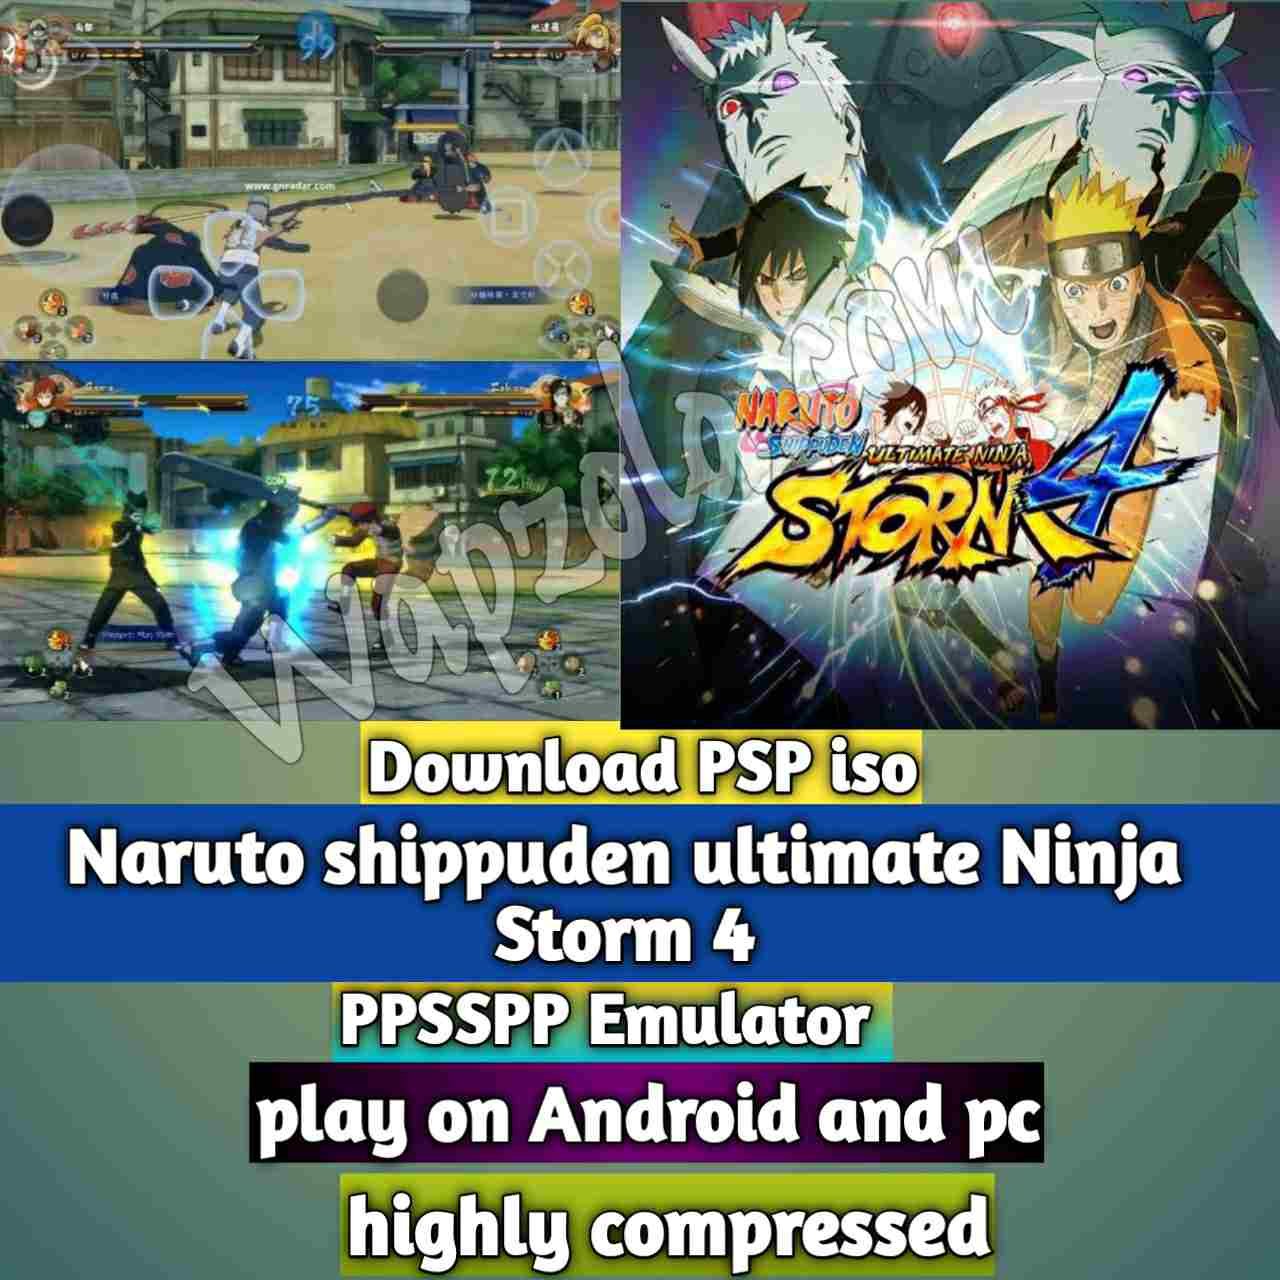 Download] Naruto shippuden ultimate Ninja Storm 4 Mod iso ppsspp emulator –  PSP APK Iso Rom highly compressed 800MB - Wapzola